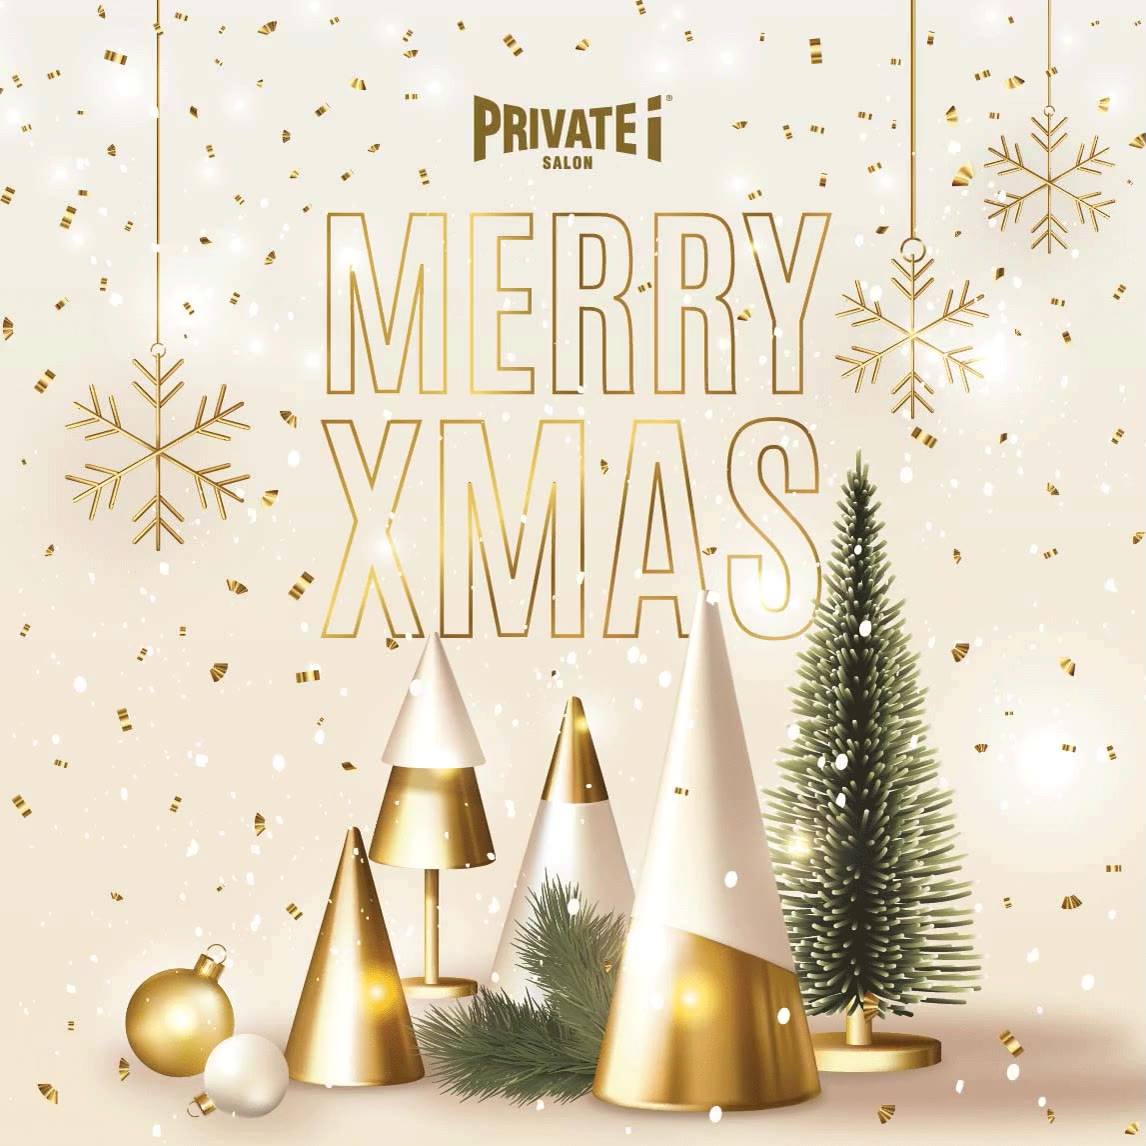 PRIVATE i SALON wish you Merry Christmas! 🎄